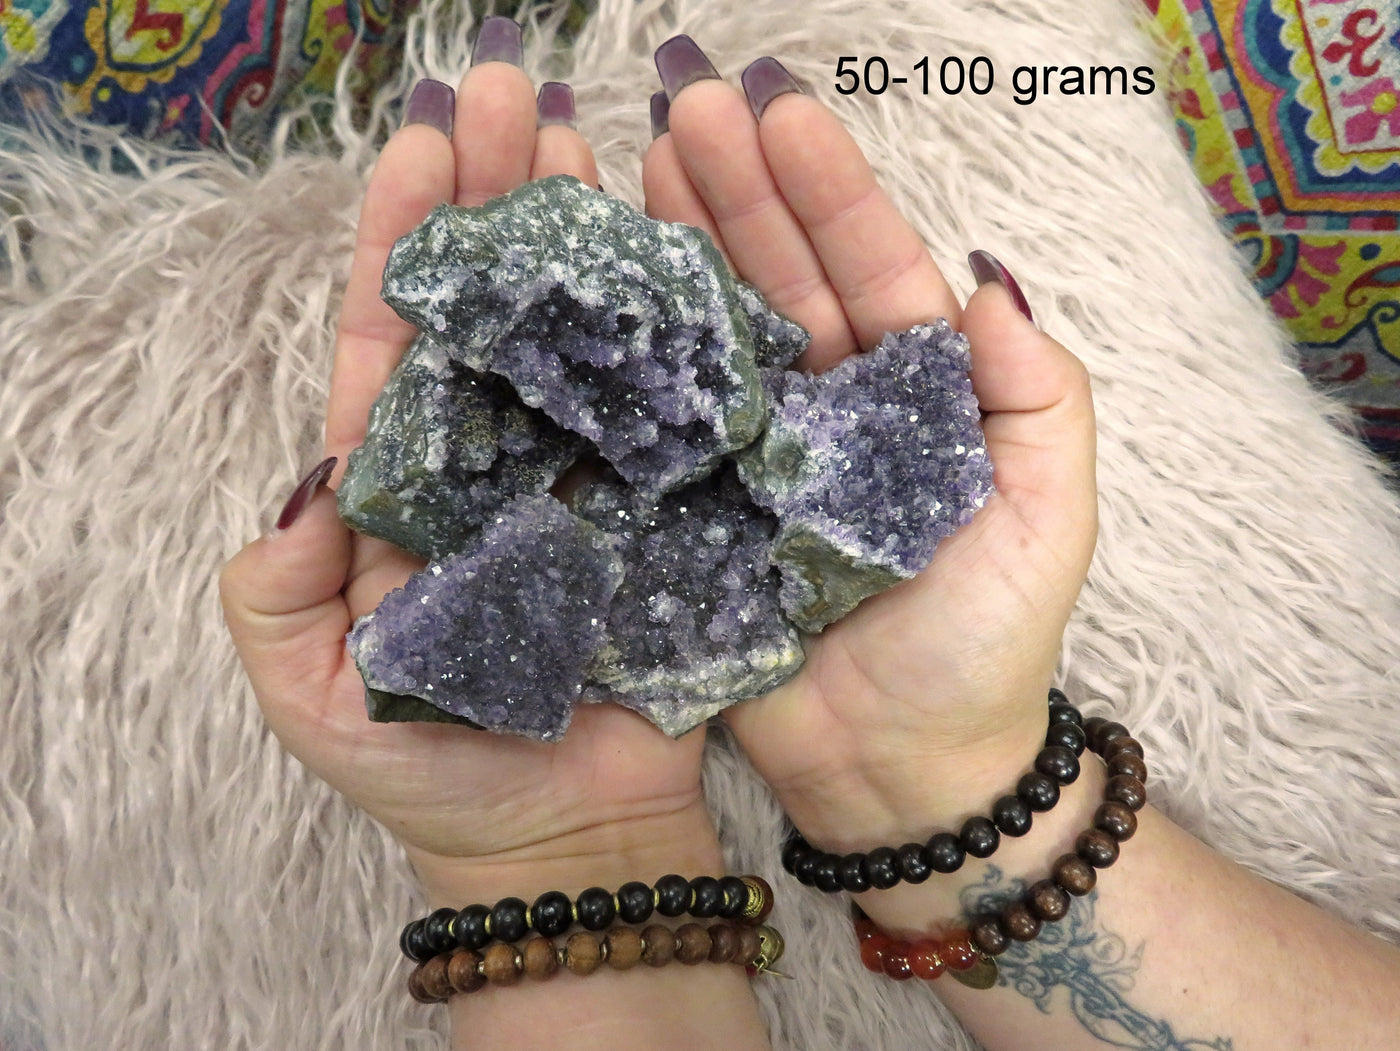 Multiple under 50 to 100 grams amethyst clusters are being held with both hands for size reference in this picture.